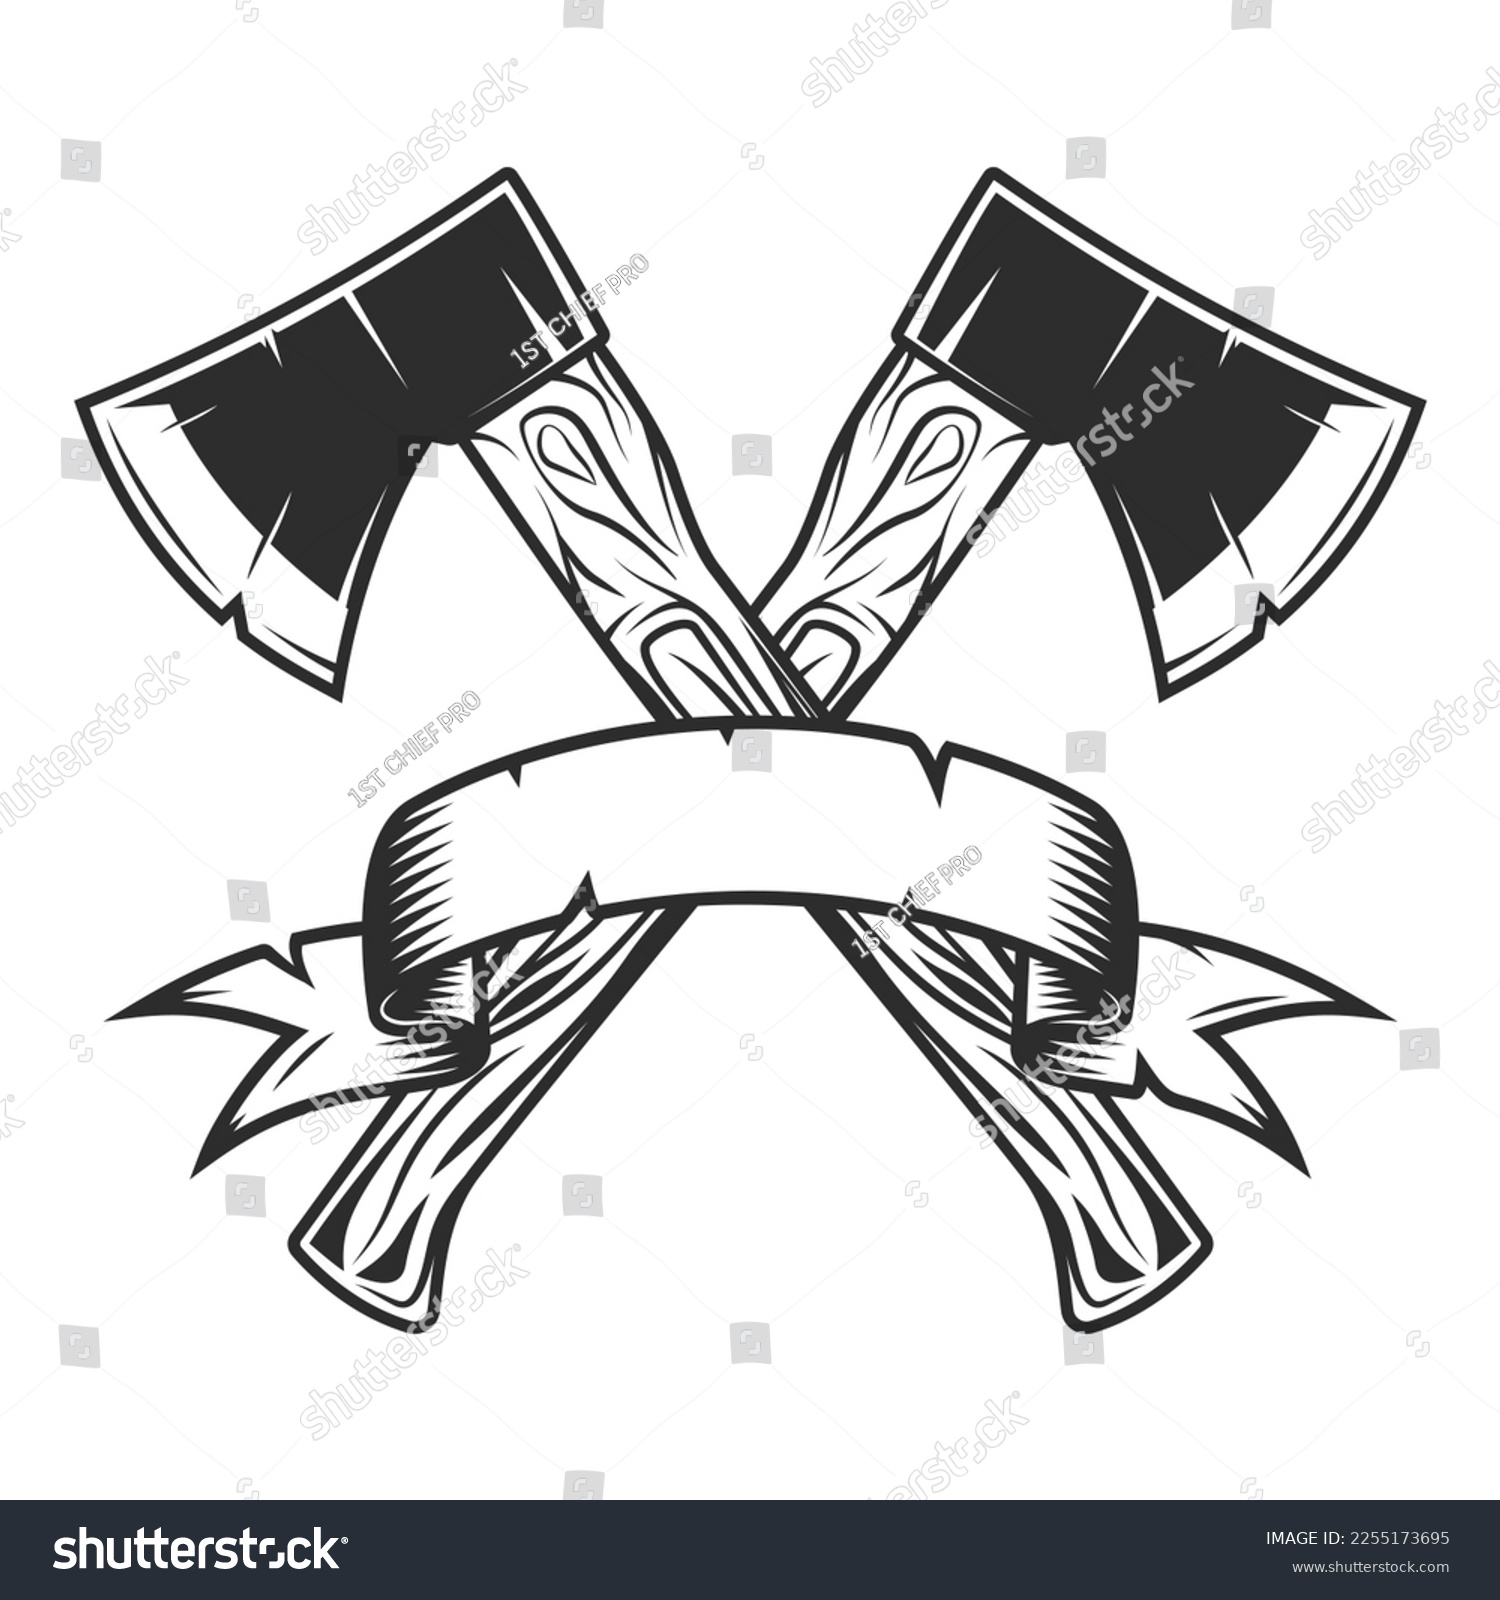 SVG of Crossed metal ax with handle made of wood and ribbon. Wooden axe construction builder tool. Element for business woodworking or lumberjack emblem or icon. svg